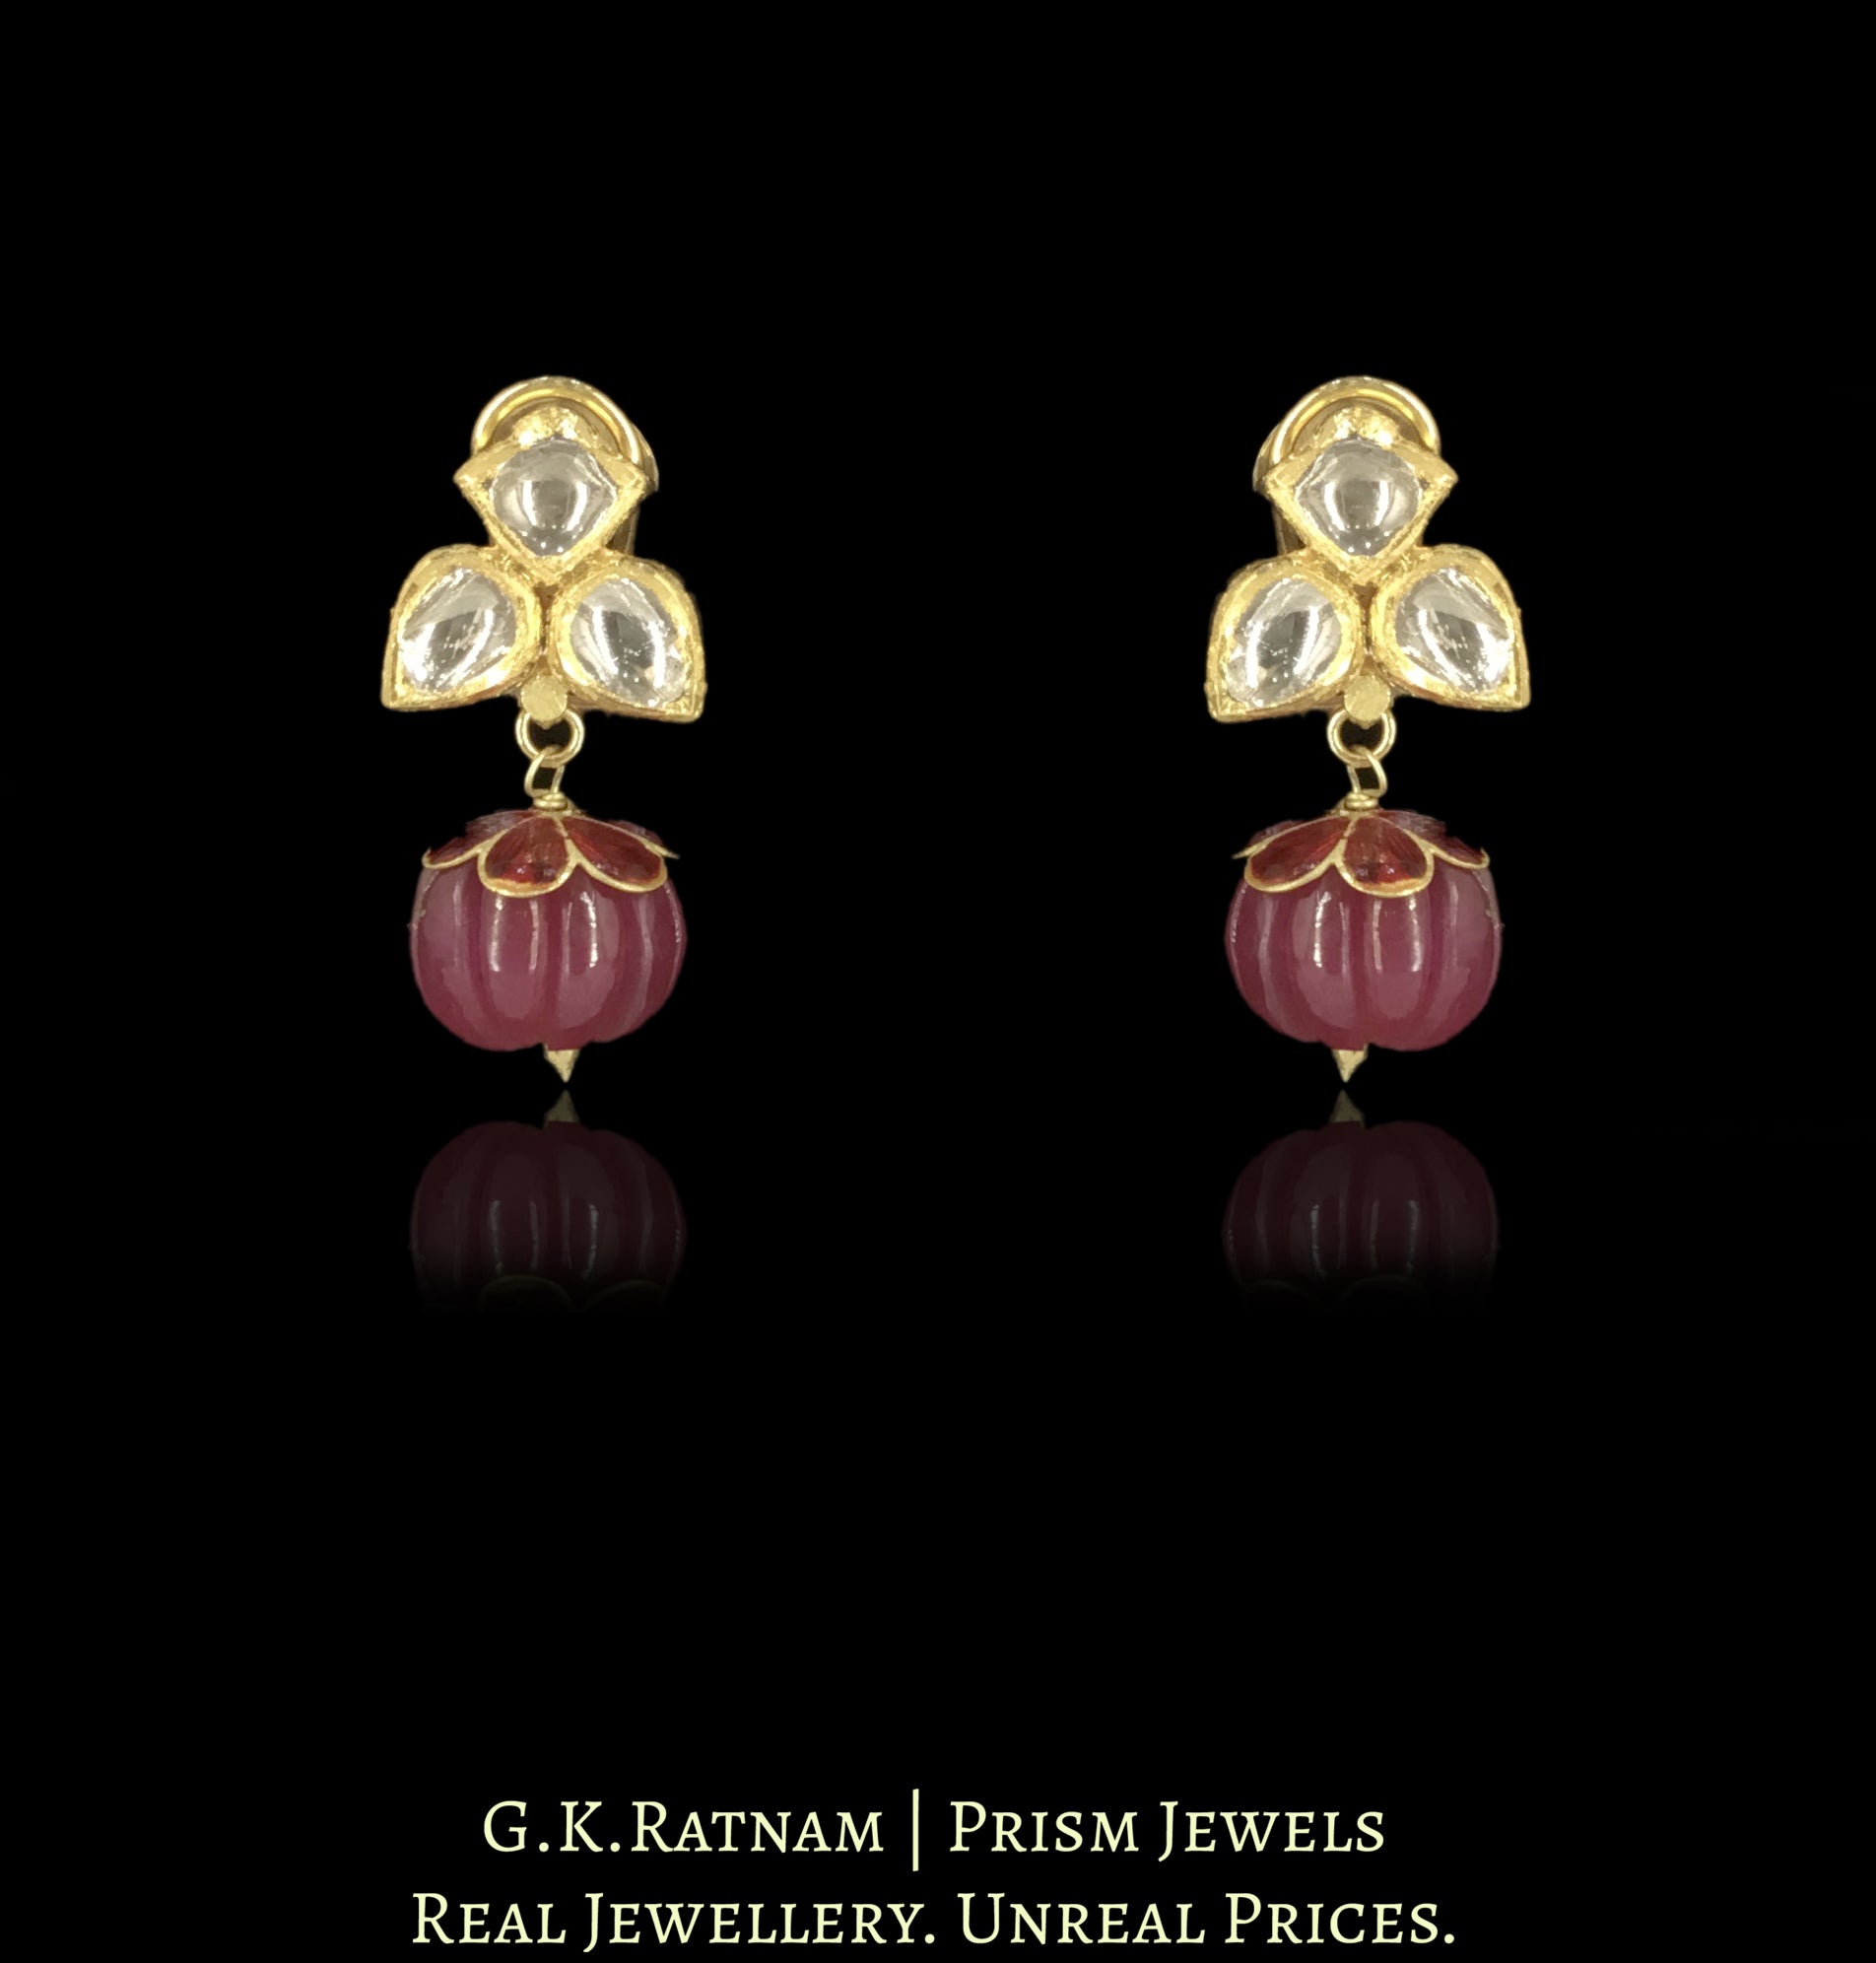 18k Gold and Diamond Polki Necklace Set With Navratna Melons And Pearls